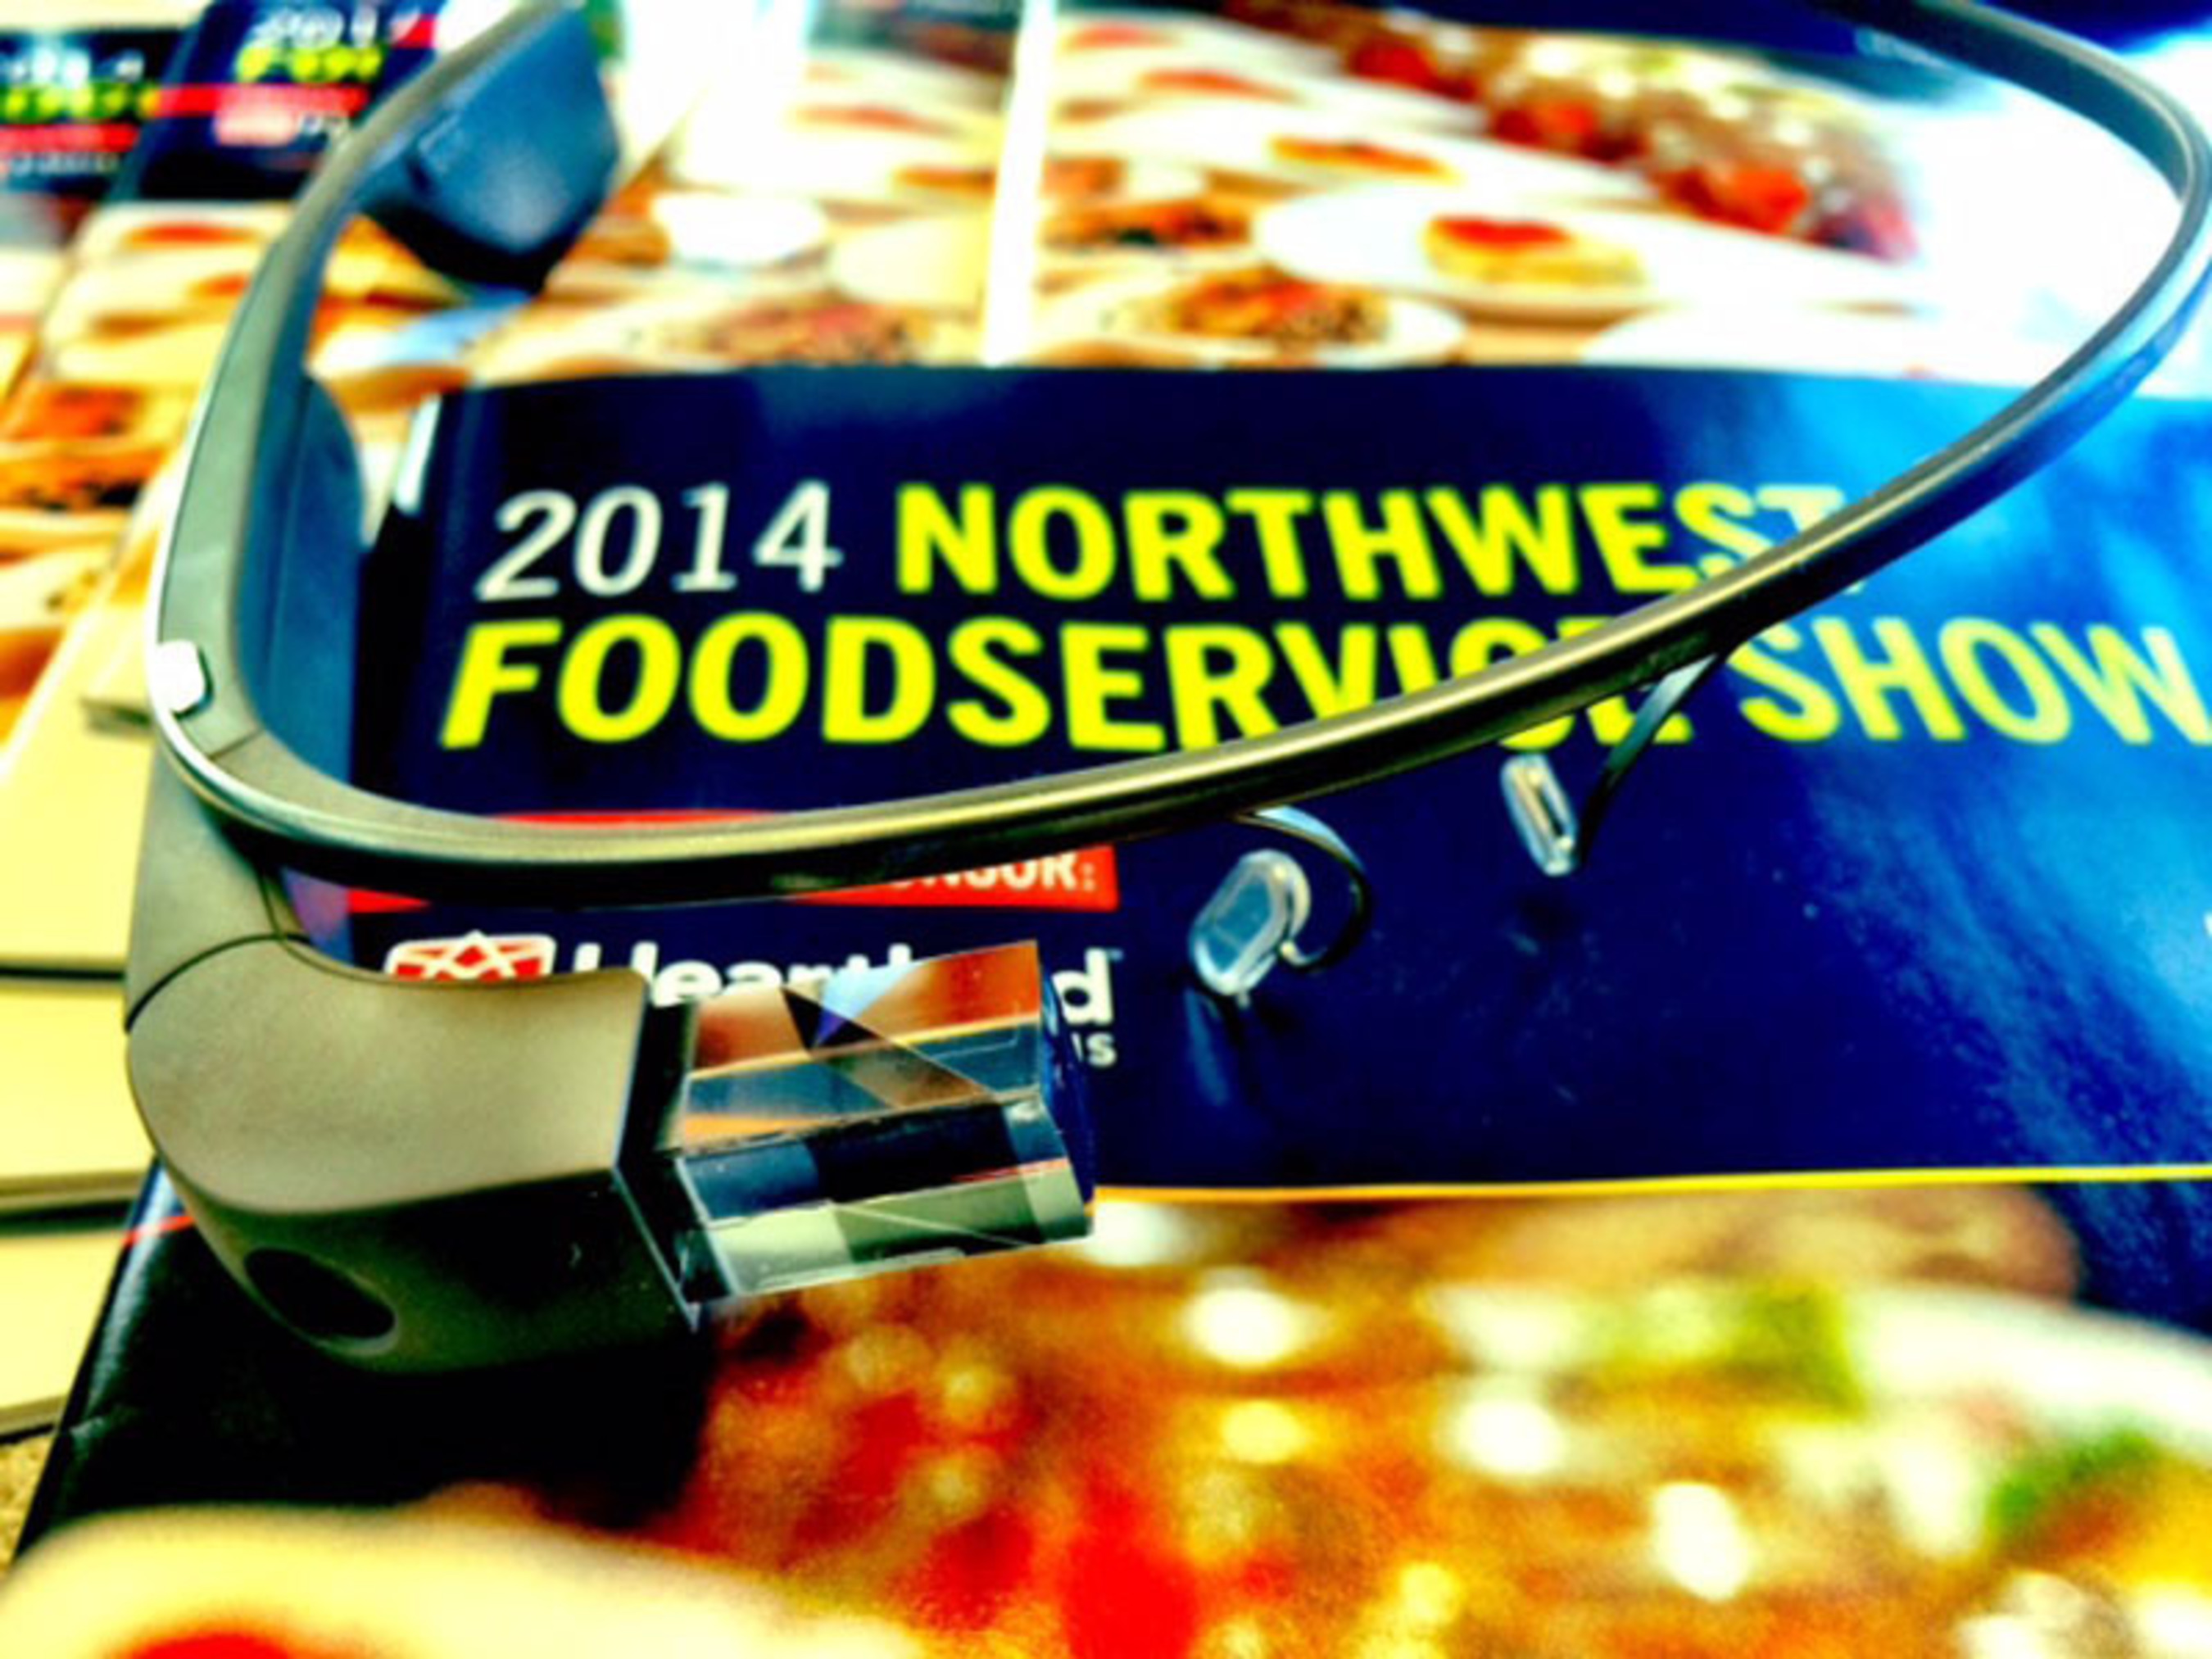 Google Glass will be used to live stream from the 2014 Northwest Foodservice Show. (PRNewsFoto/Washington Restaurant Association) (PRNewsFoto/WASHINGTON RESTAURANT ASSOC___)